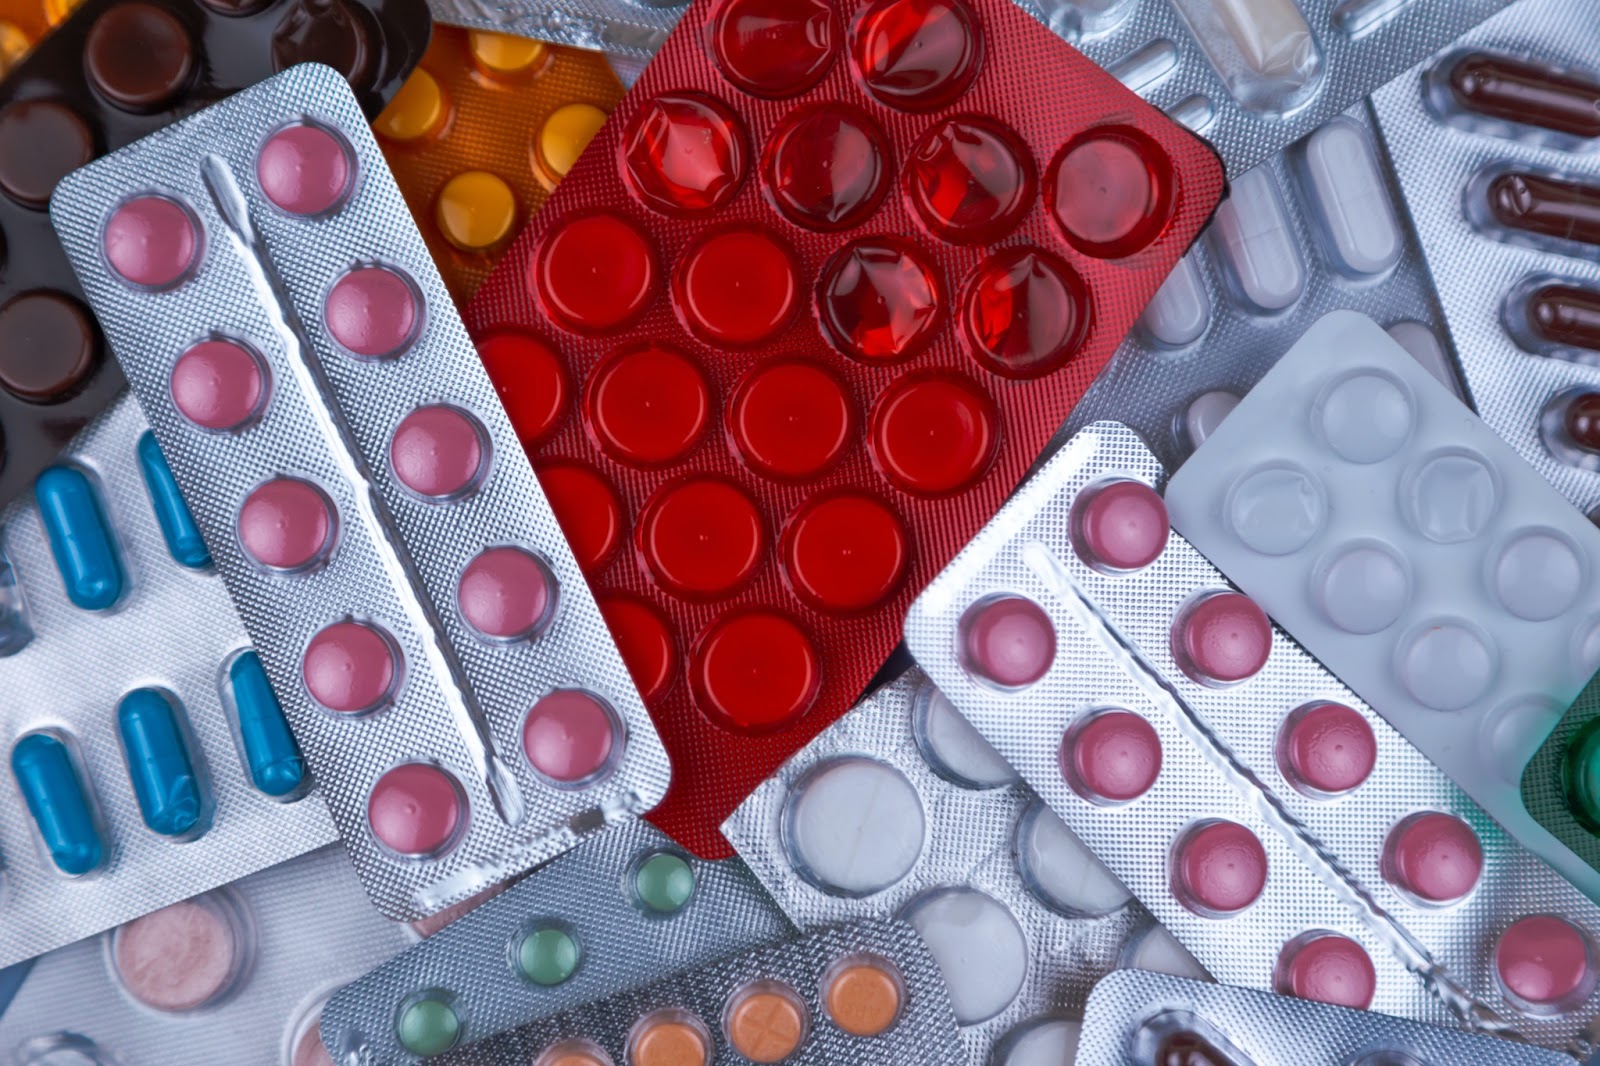 Pharmacy pills in a pile